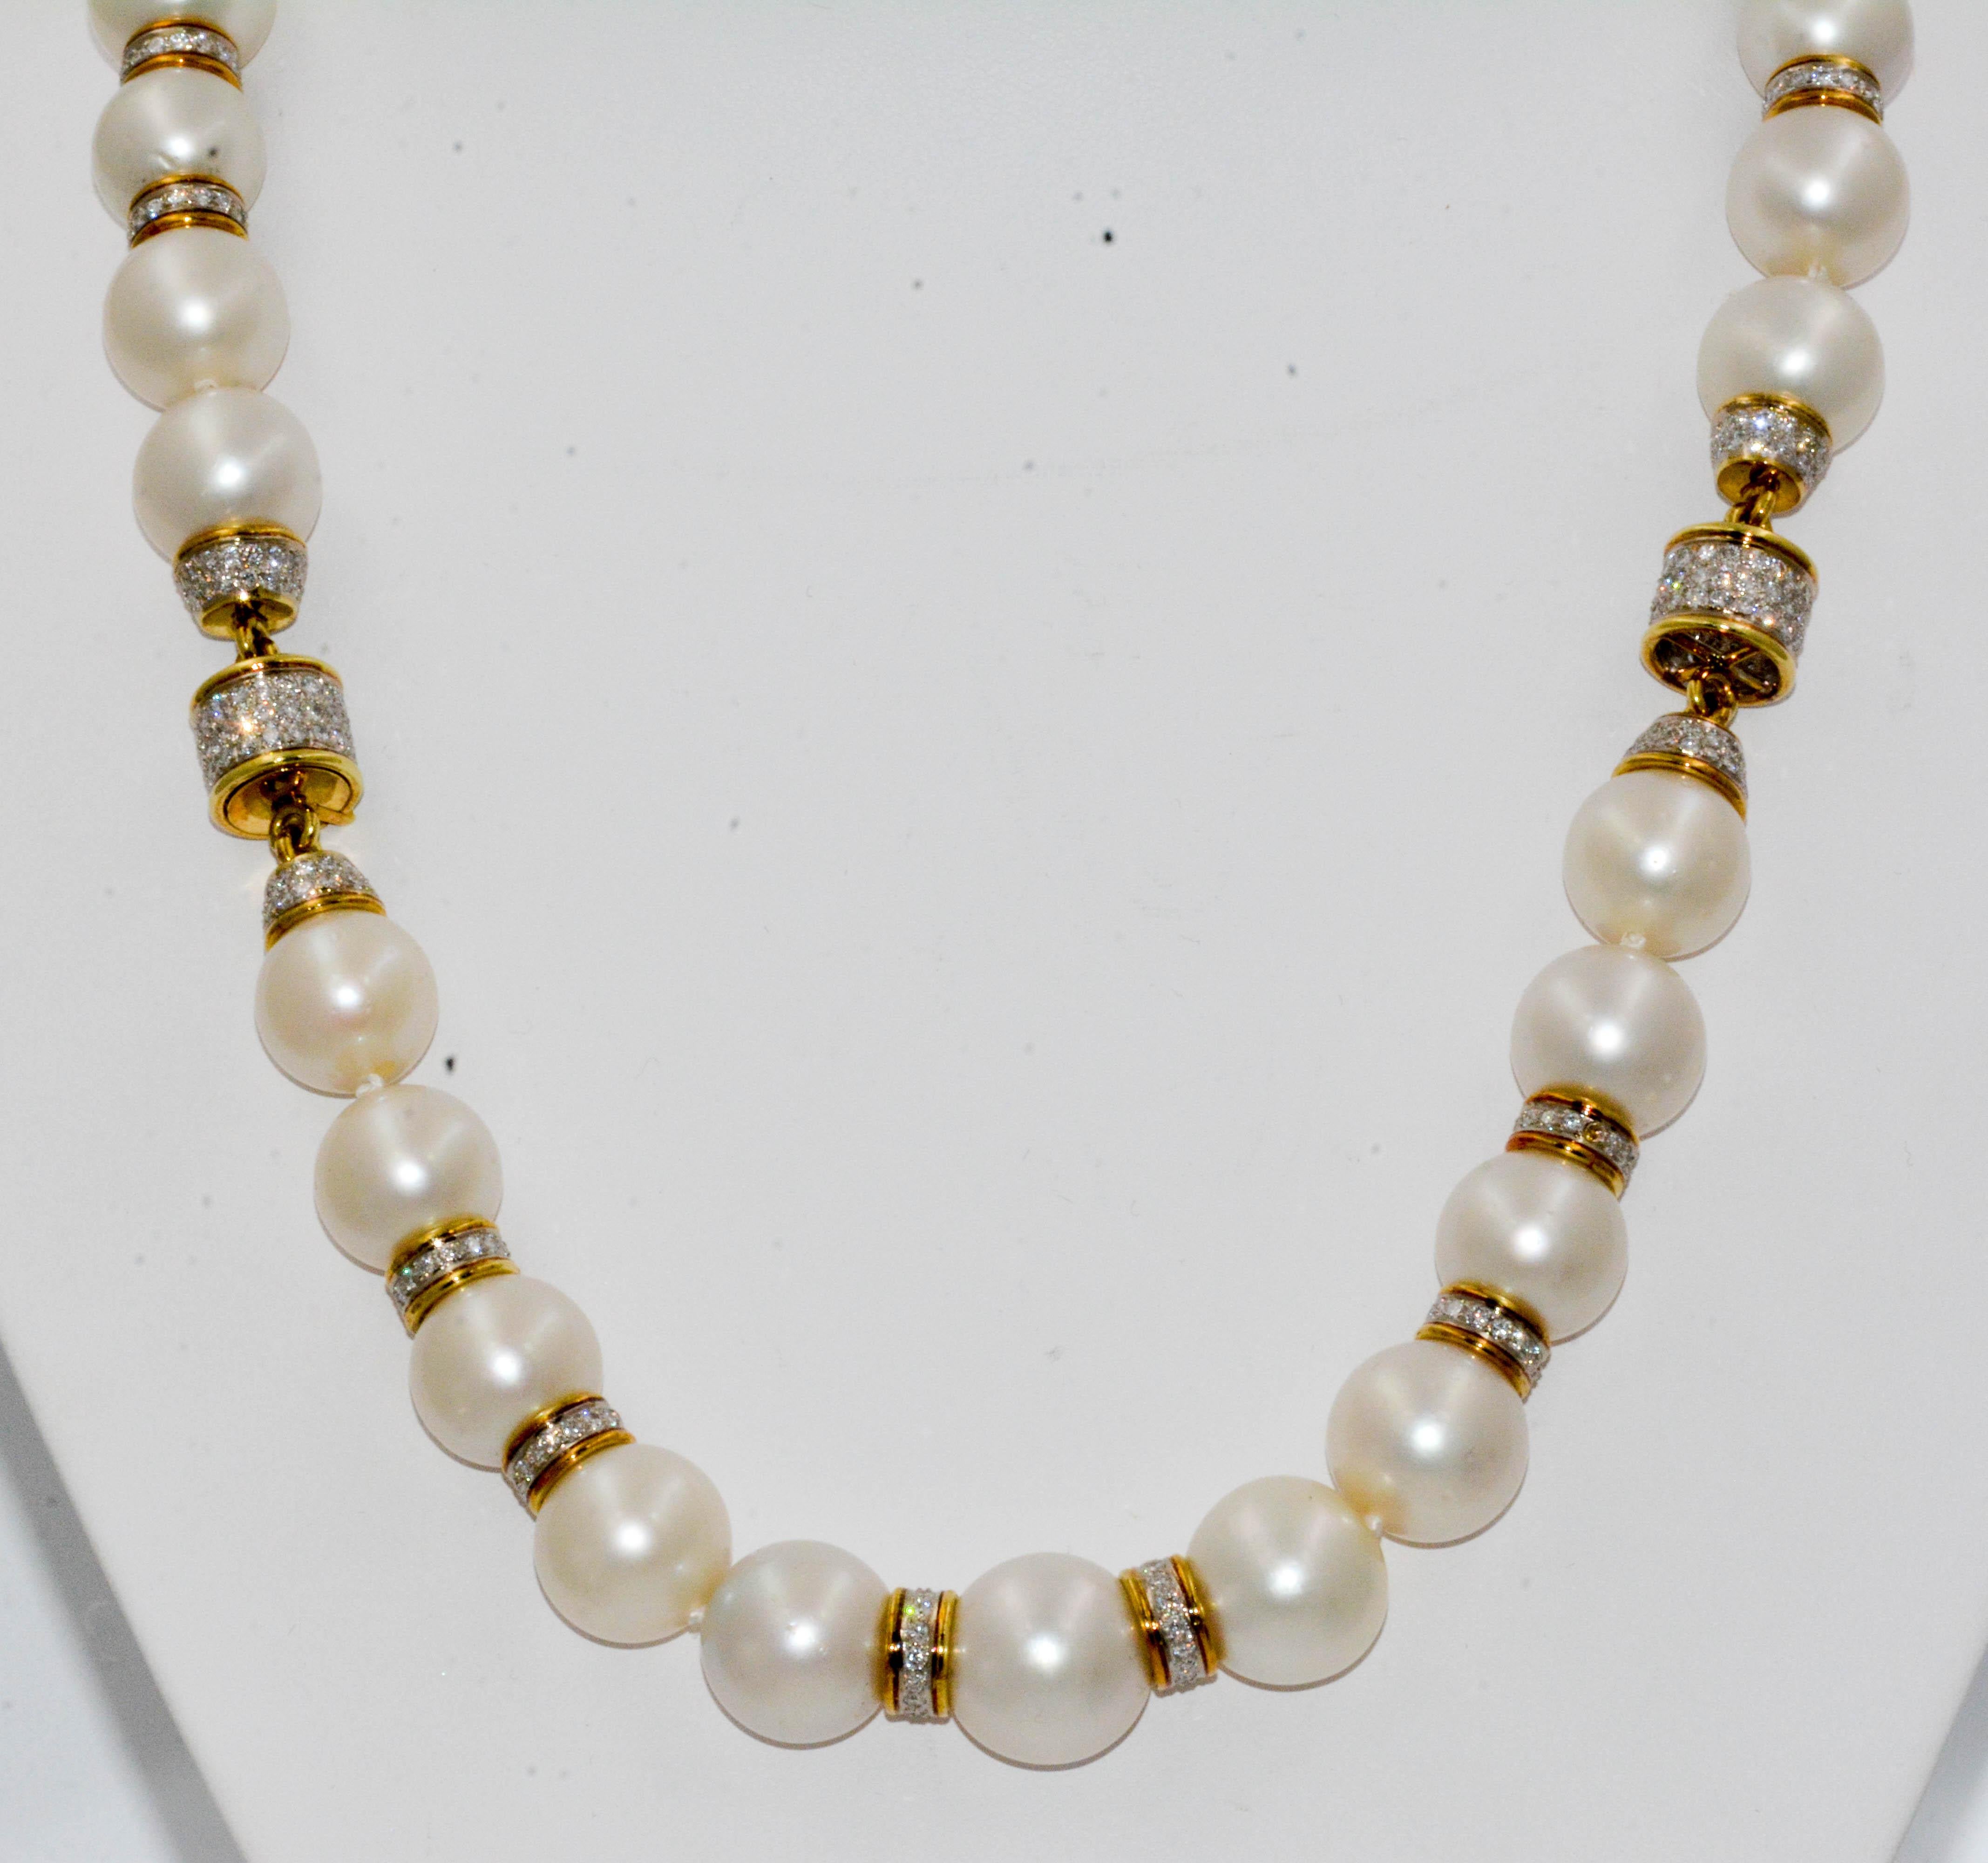 Astonishing 14 mm South Sea pearls are joined together by 6.00 carat total weight diamond rondelles. 400 round brilliant cut diamonds are expertly set in 18 karat yellow gold rondelles which complement these exquisite South Sea pearls. This elegant